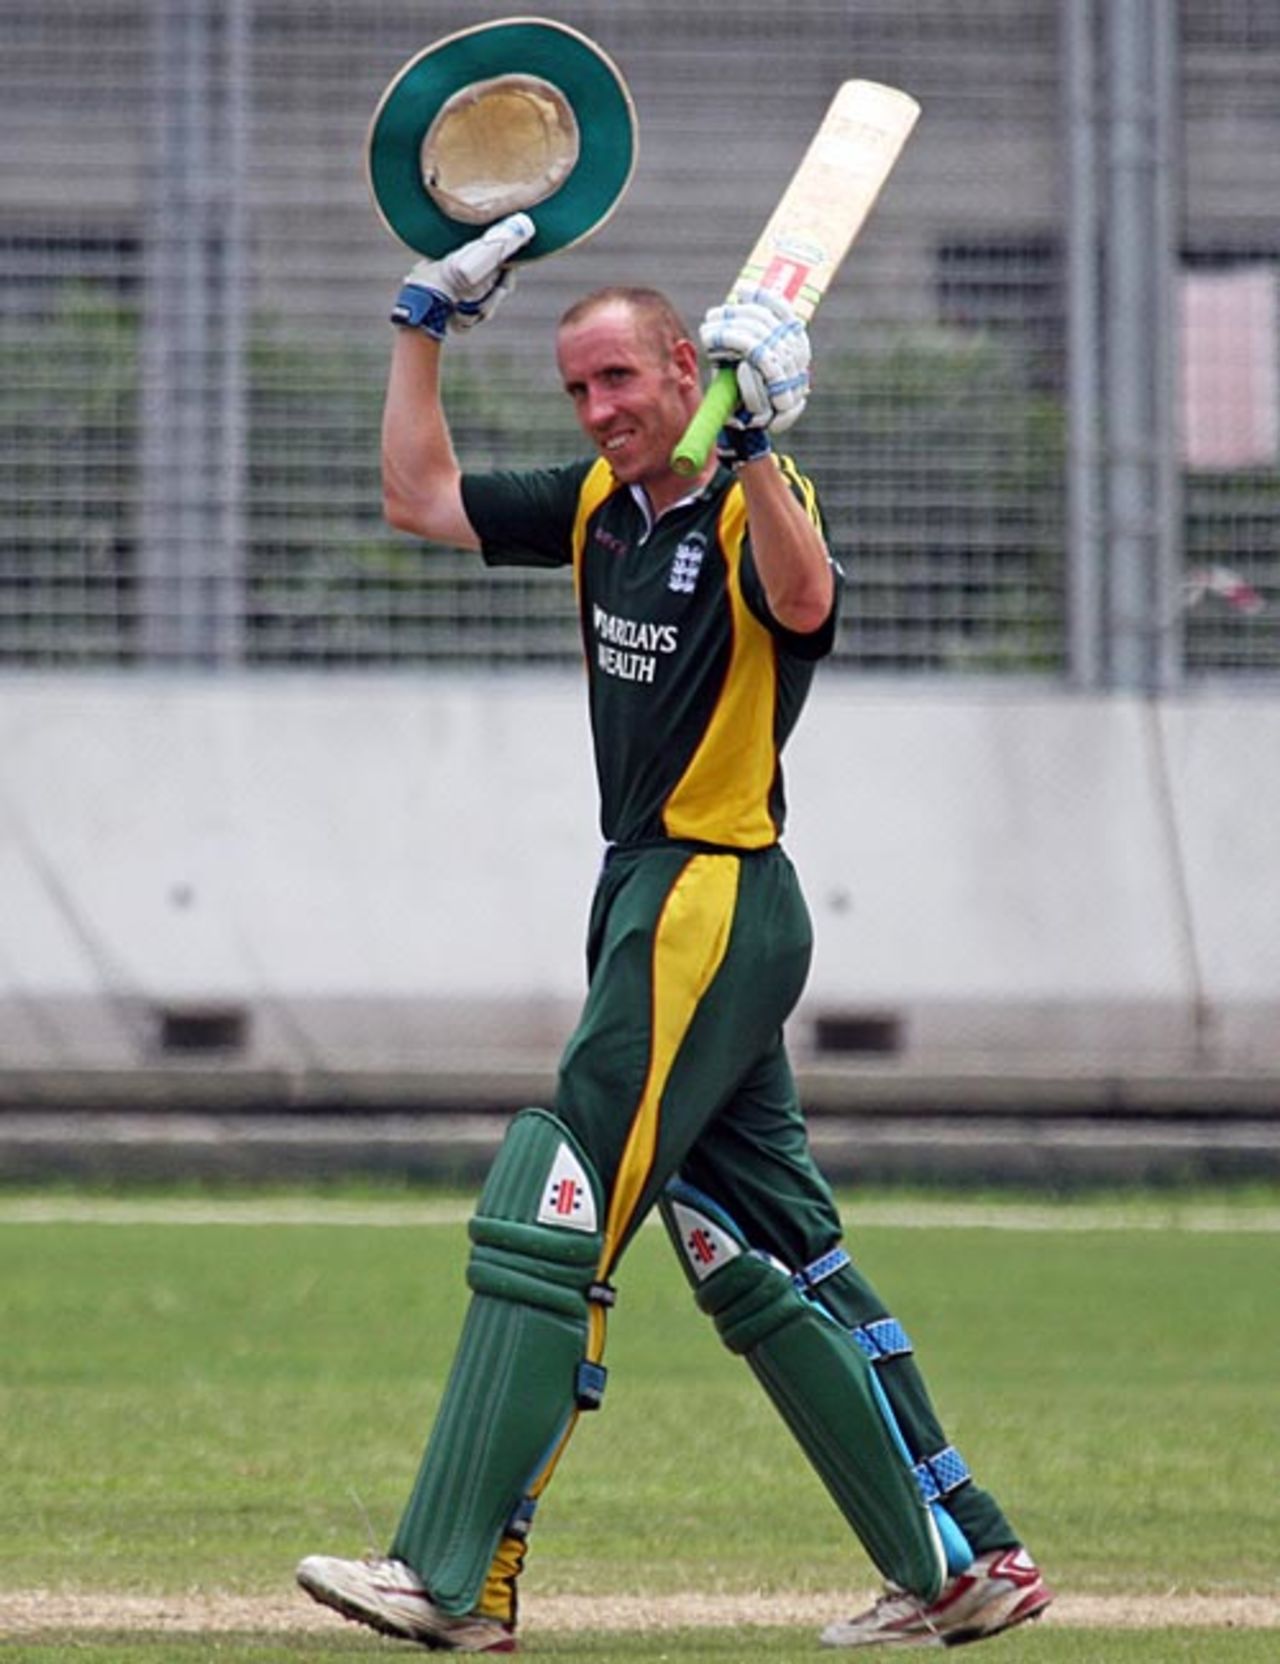 Jeremy Frith celebrates his hundred, Malaysia v Guernsey, ICC World Cricket League Division 6, Singapore, September 5, 2009